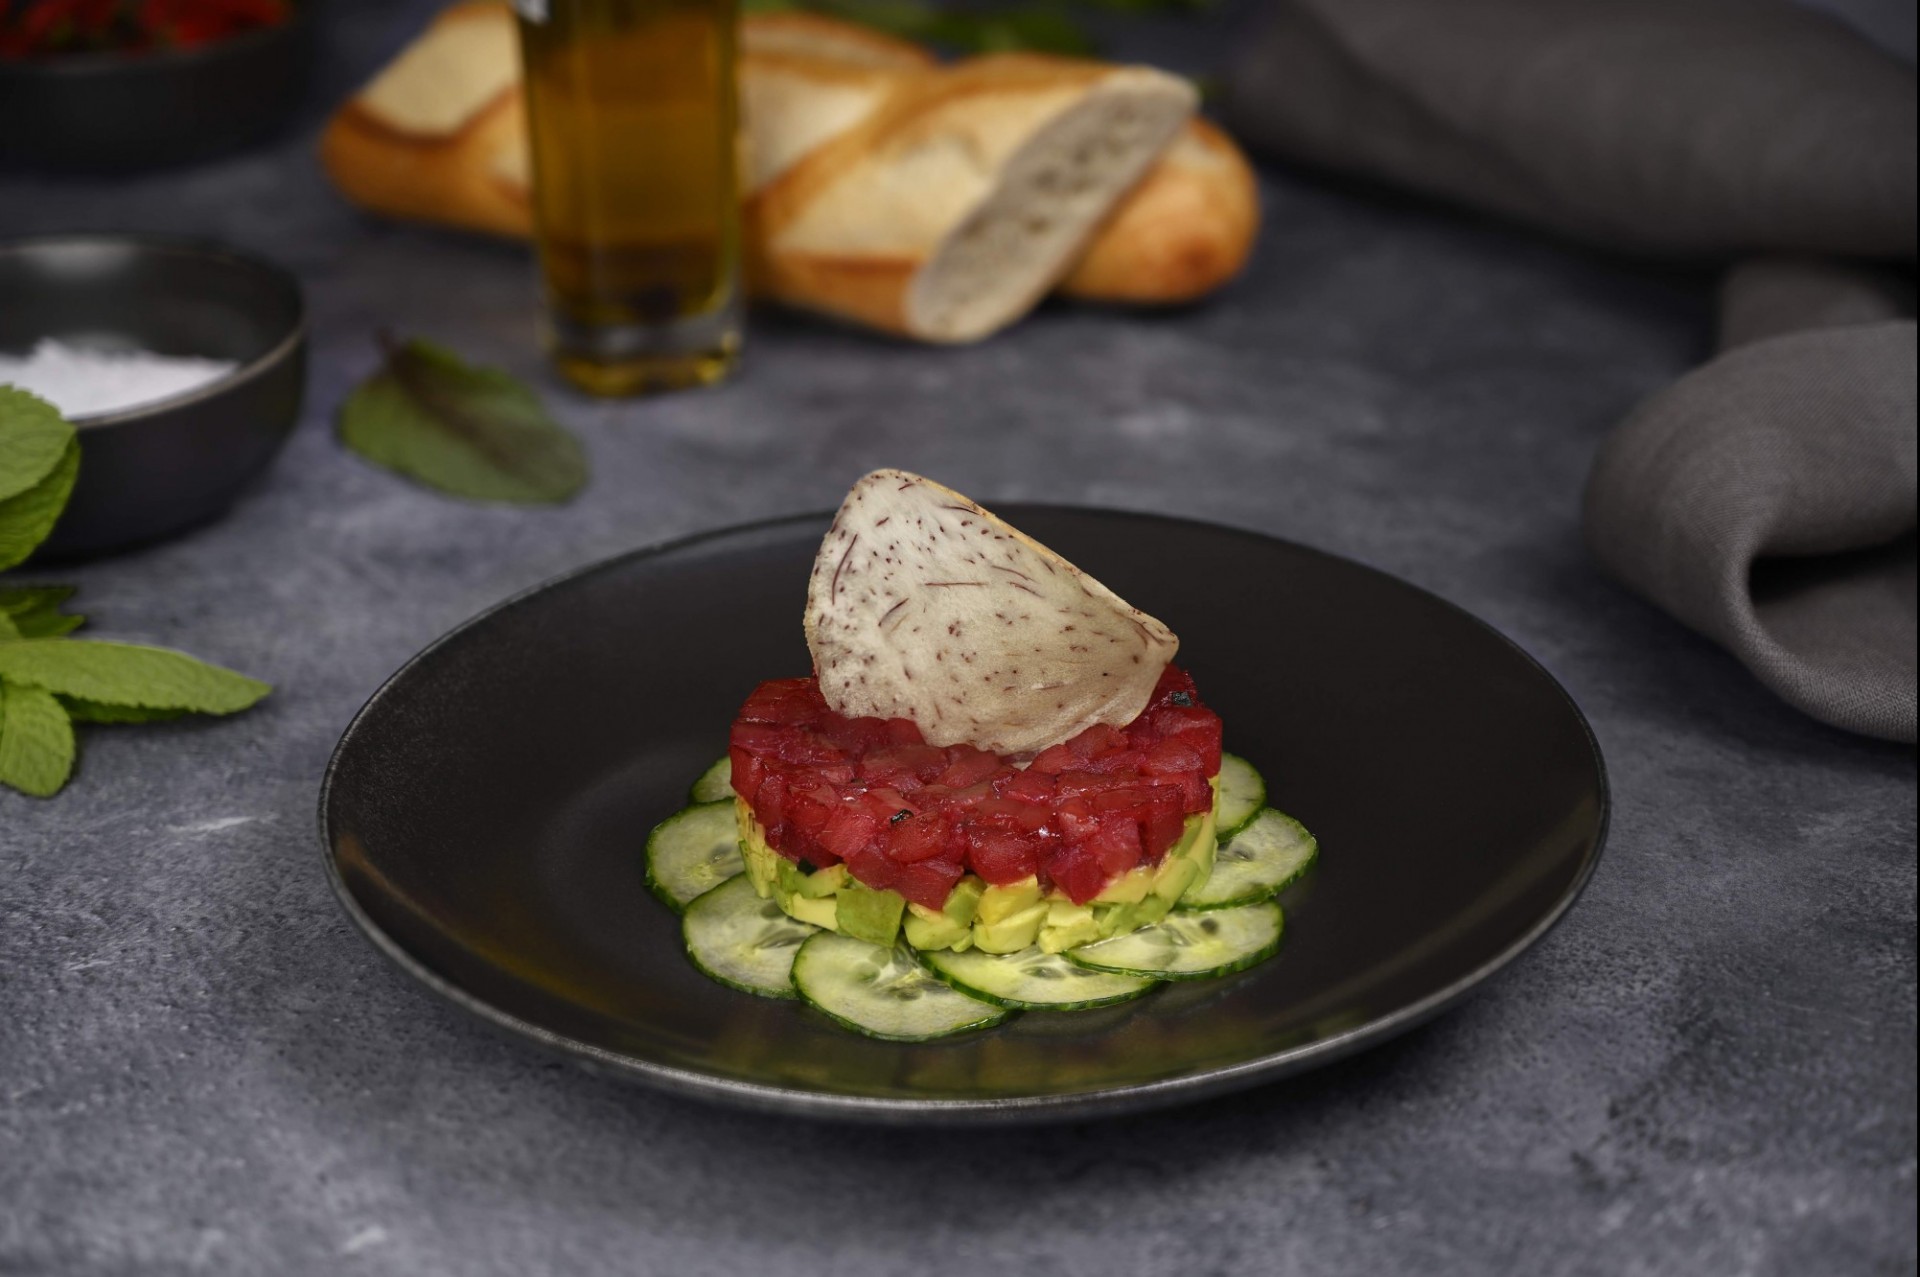 Tuna tartar topped with a taro chip sits on a bed of thinly sliced cucumber